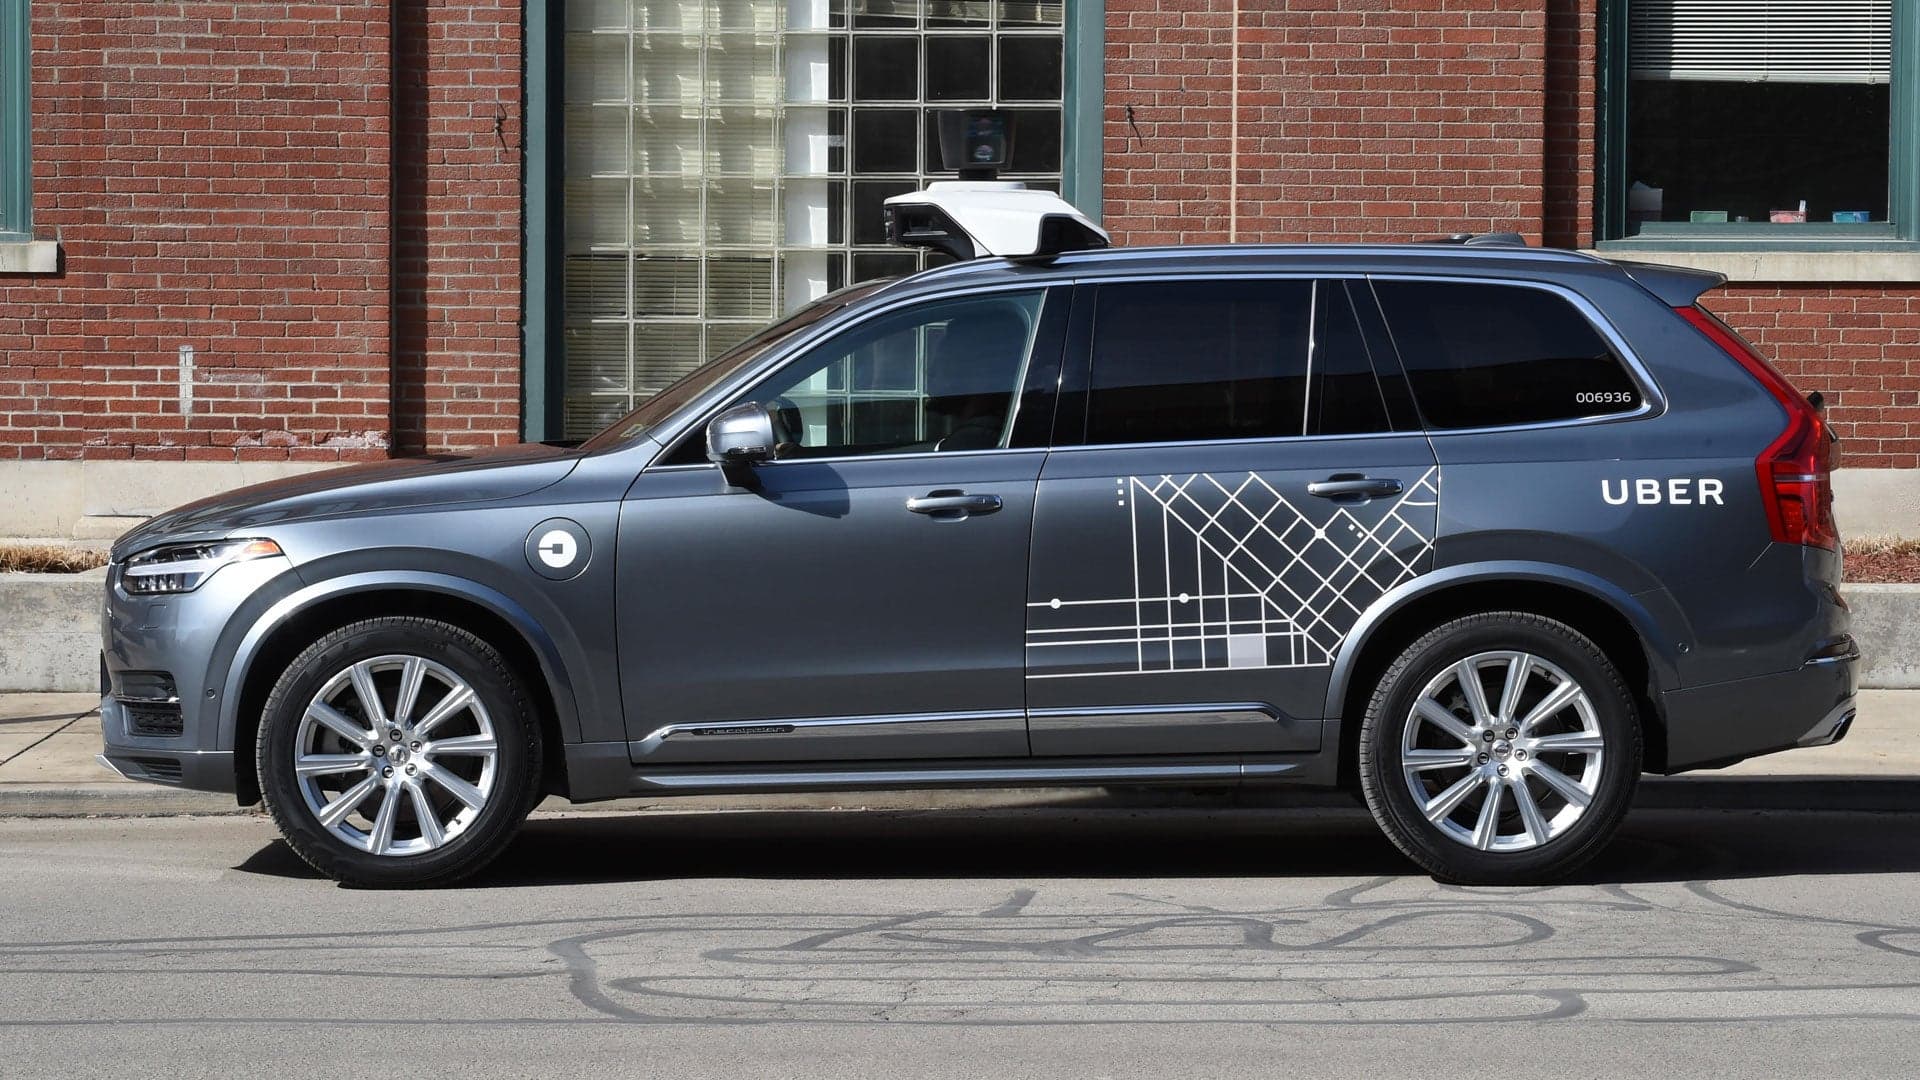 An Autonomous Uber Claimed its First Pedestrian Victim, but Don’t Expect Washington to Care